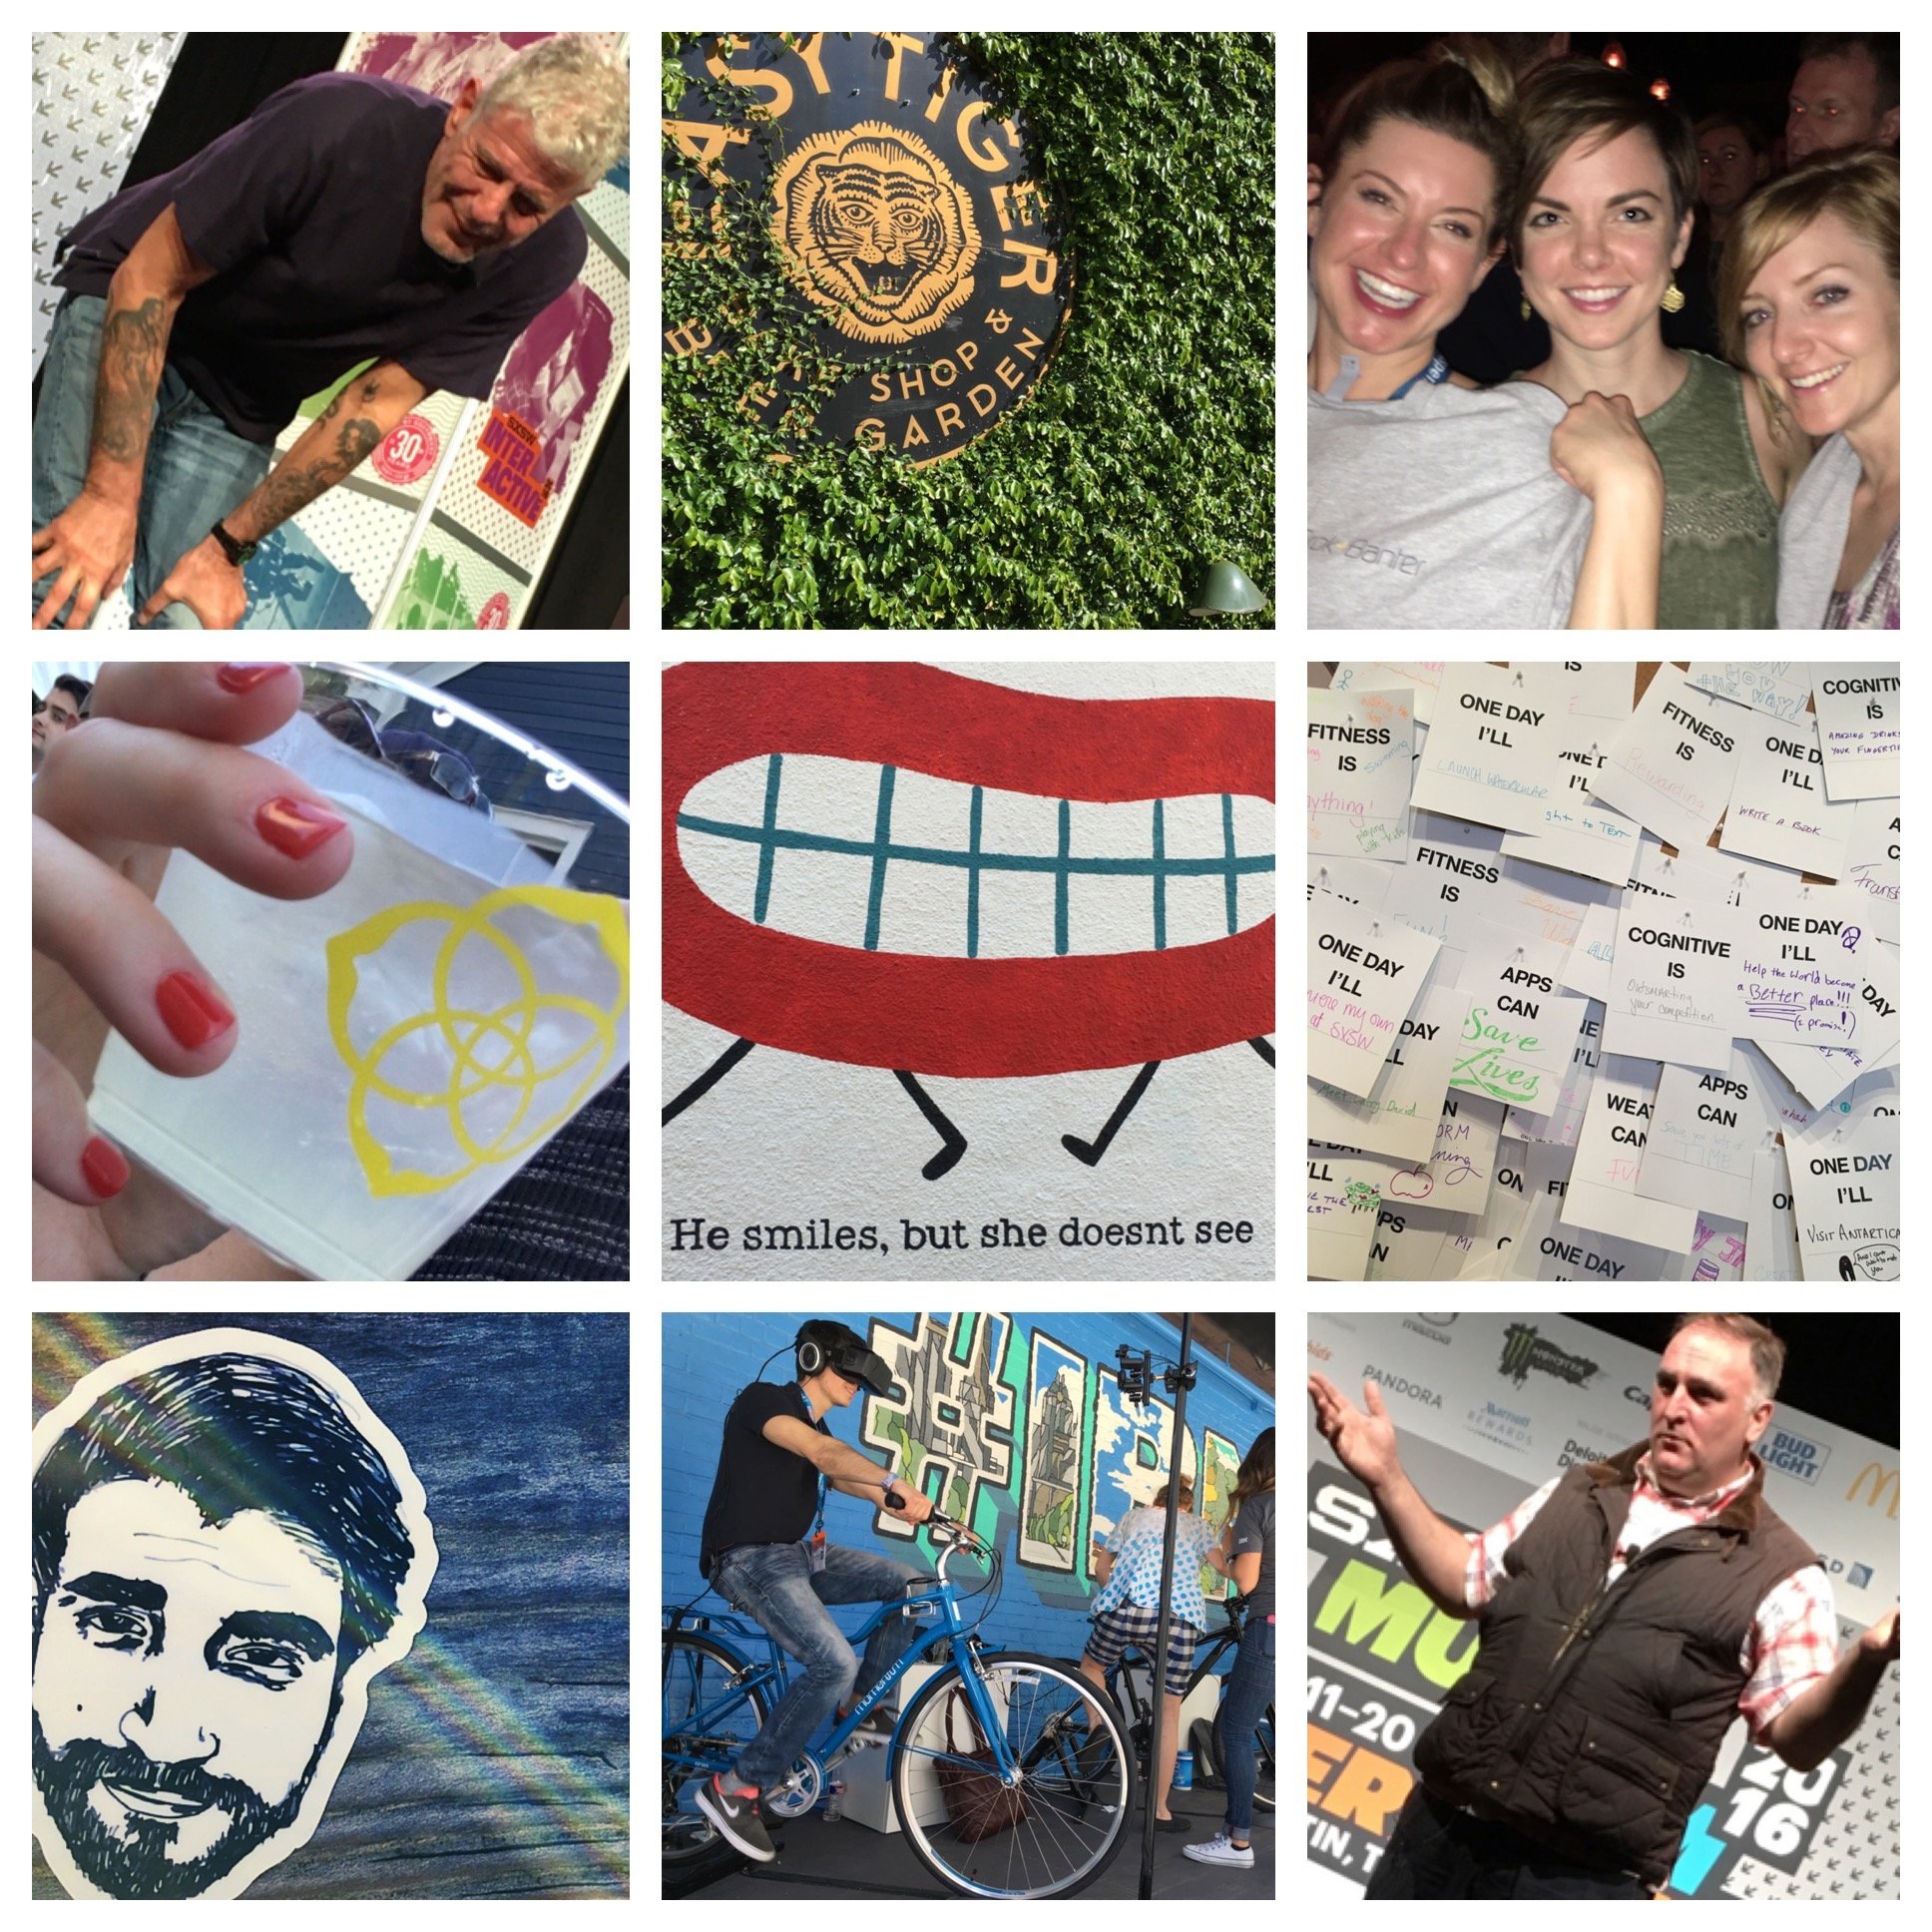 Collage of photos from South by Southwest festival, including a picture of Anthony Bourdain. 